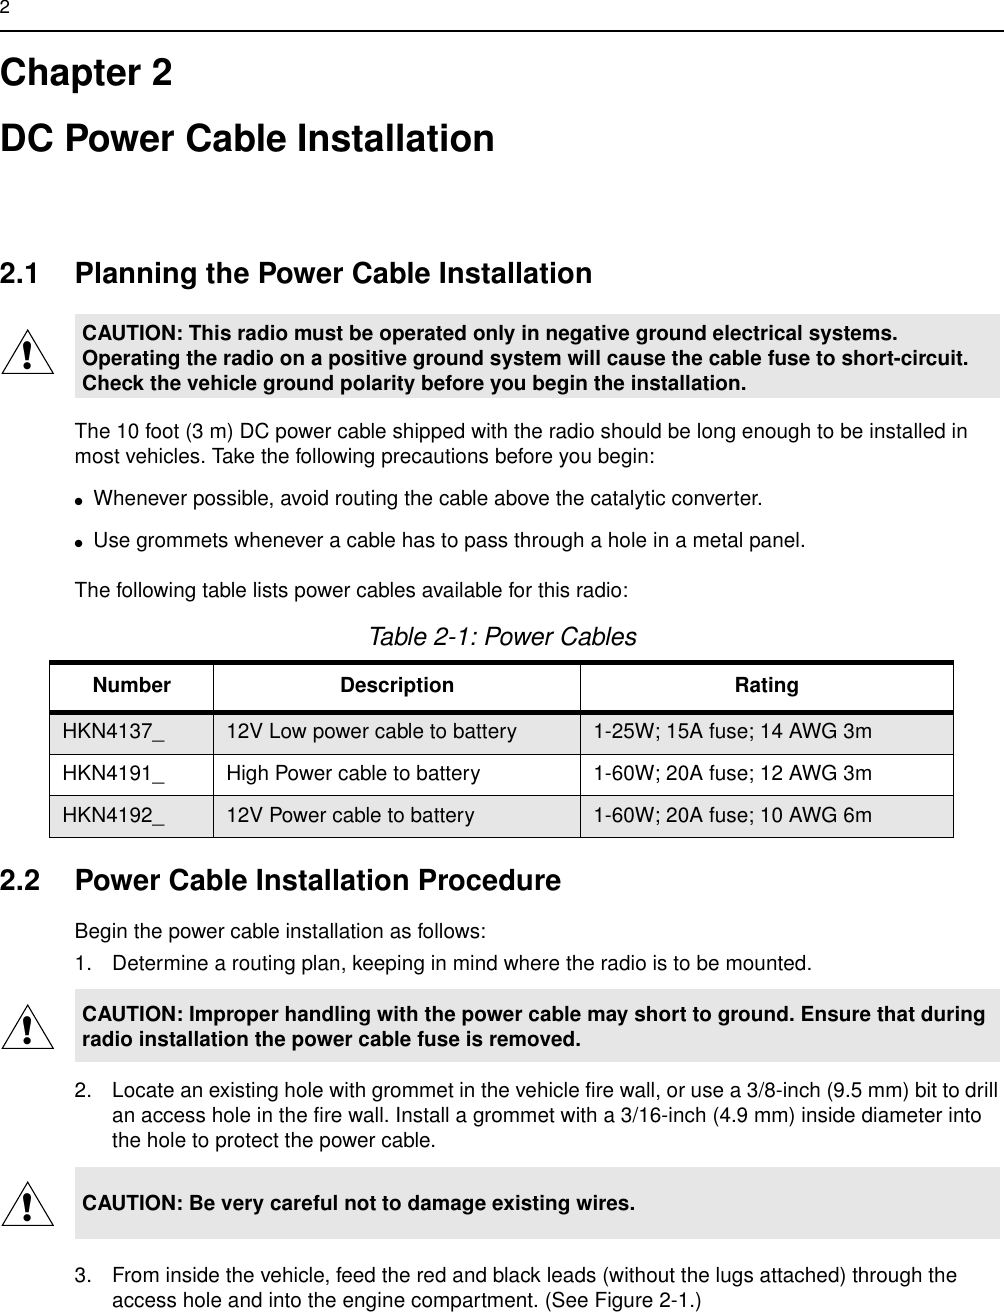 2Chapter 2DC Power Cable Installation2.1 Planning the Power Cable InstallationThe 10 foot (3 m) DC power cable shipped with the radio should be long enough to be installed in most vehicles. Take the following precautions before you begin:●Whenever possible, avoid routing the cable above the catalytic converter. ●Use grommets whenever a cable has to pass through a hole in a metal panel. The following table lists power cables available for this radio:2.2 Power Cable Installation ProcedureBegin the power cable installation as follows:1. Determine a routing plan, keeping in mind where the radio is to be mounted.2. Locate an existing hole with grommet in the vehicle fire wall, or use a 3/8-inch (9.5 mm) bit to drill an access hole in the fire wall. Install a grommet with a 3/16-inch (4.9 mm) inside diameter into the hole to protect the power cable.3. From inside the vehicle, feed the red and black leads (without the lugs attached) through the access hole and into the engine compartment. (See Figure 2-1.)CAUTION: This radio must be operated only in negative ground electrical systems. Operating the radio on a positive ground system will cause the cable fuse to short-circuit. Check the vehicle ground polarity before you begin the installation.Table 2-1: Power CablesNumber Description RatingHKN4137_ 12V Low power cable to battery 1-25W; 15A fuse; 14 AWG 3m HKN4191_ High Power cable to battery 1-60W; 20A fuse; 12 AWG 3mHKN4192_ 12V Power cable to battery 1-60W; 20A fuse; 10 AWG 6mCAUTION: Improper handling with the power cable may short to ground. Ensure that during radio installation the power cable fuse is removed.CAUTION: Be very careful not to damage existing wires.!!!